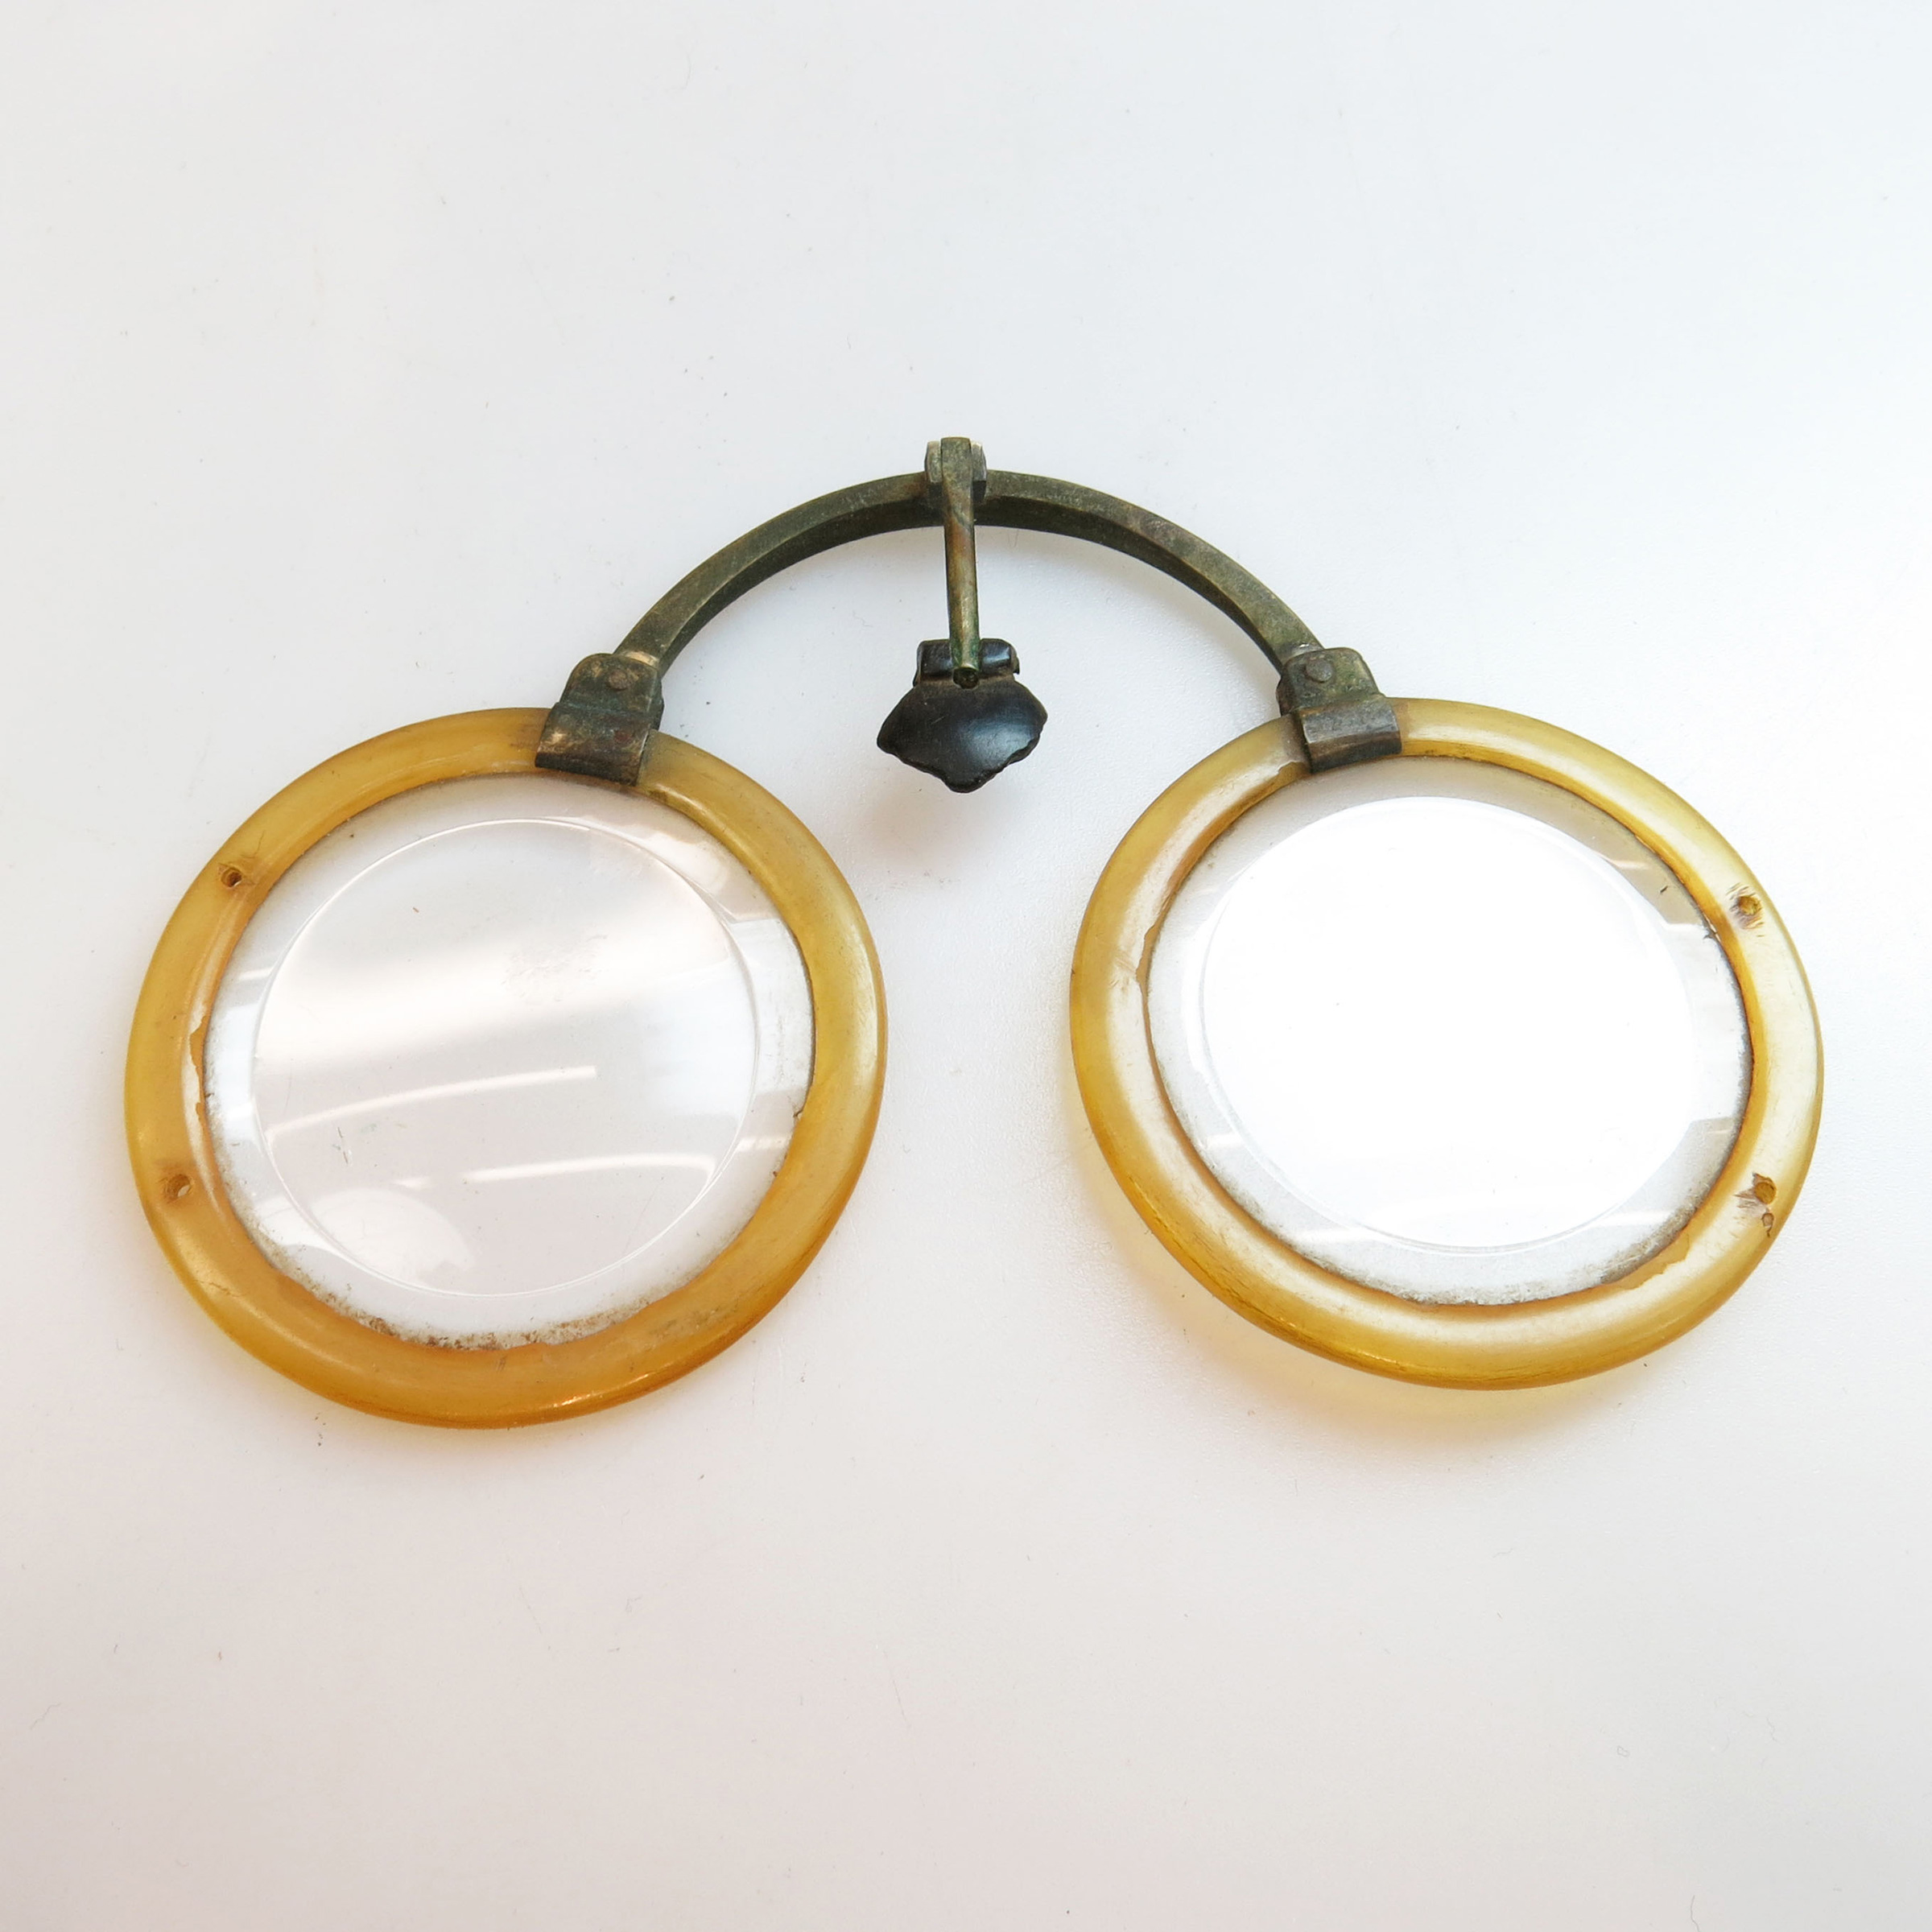 Pair Of 18th Century Chinese Baitong And Horn Spectacles